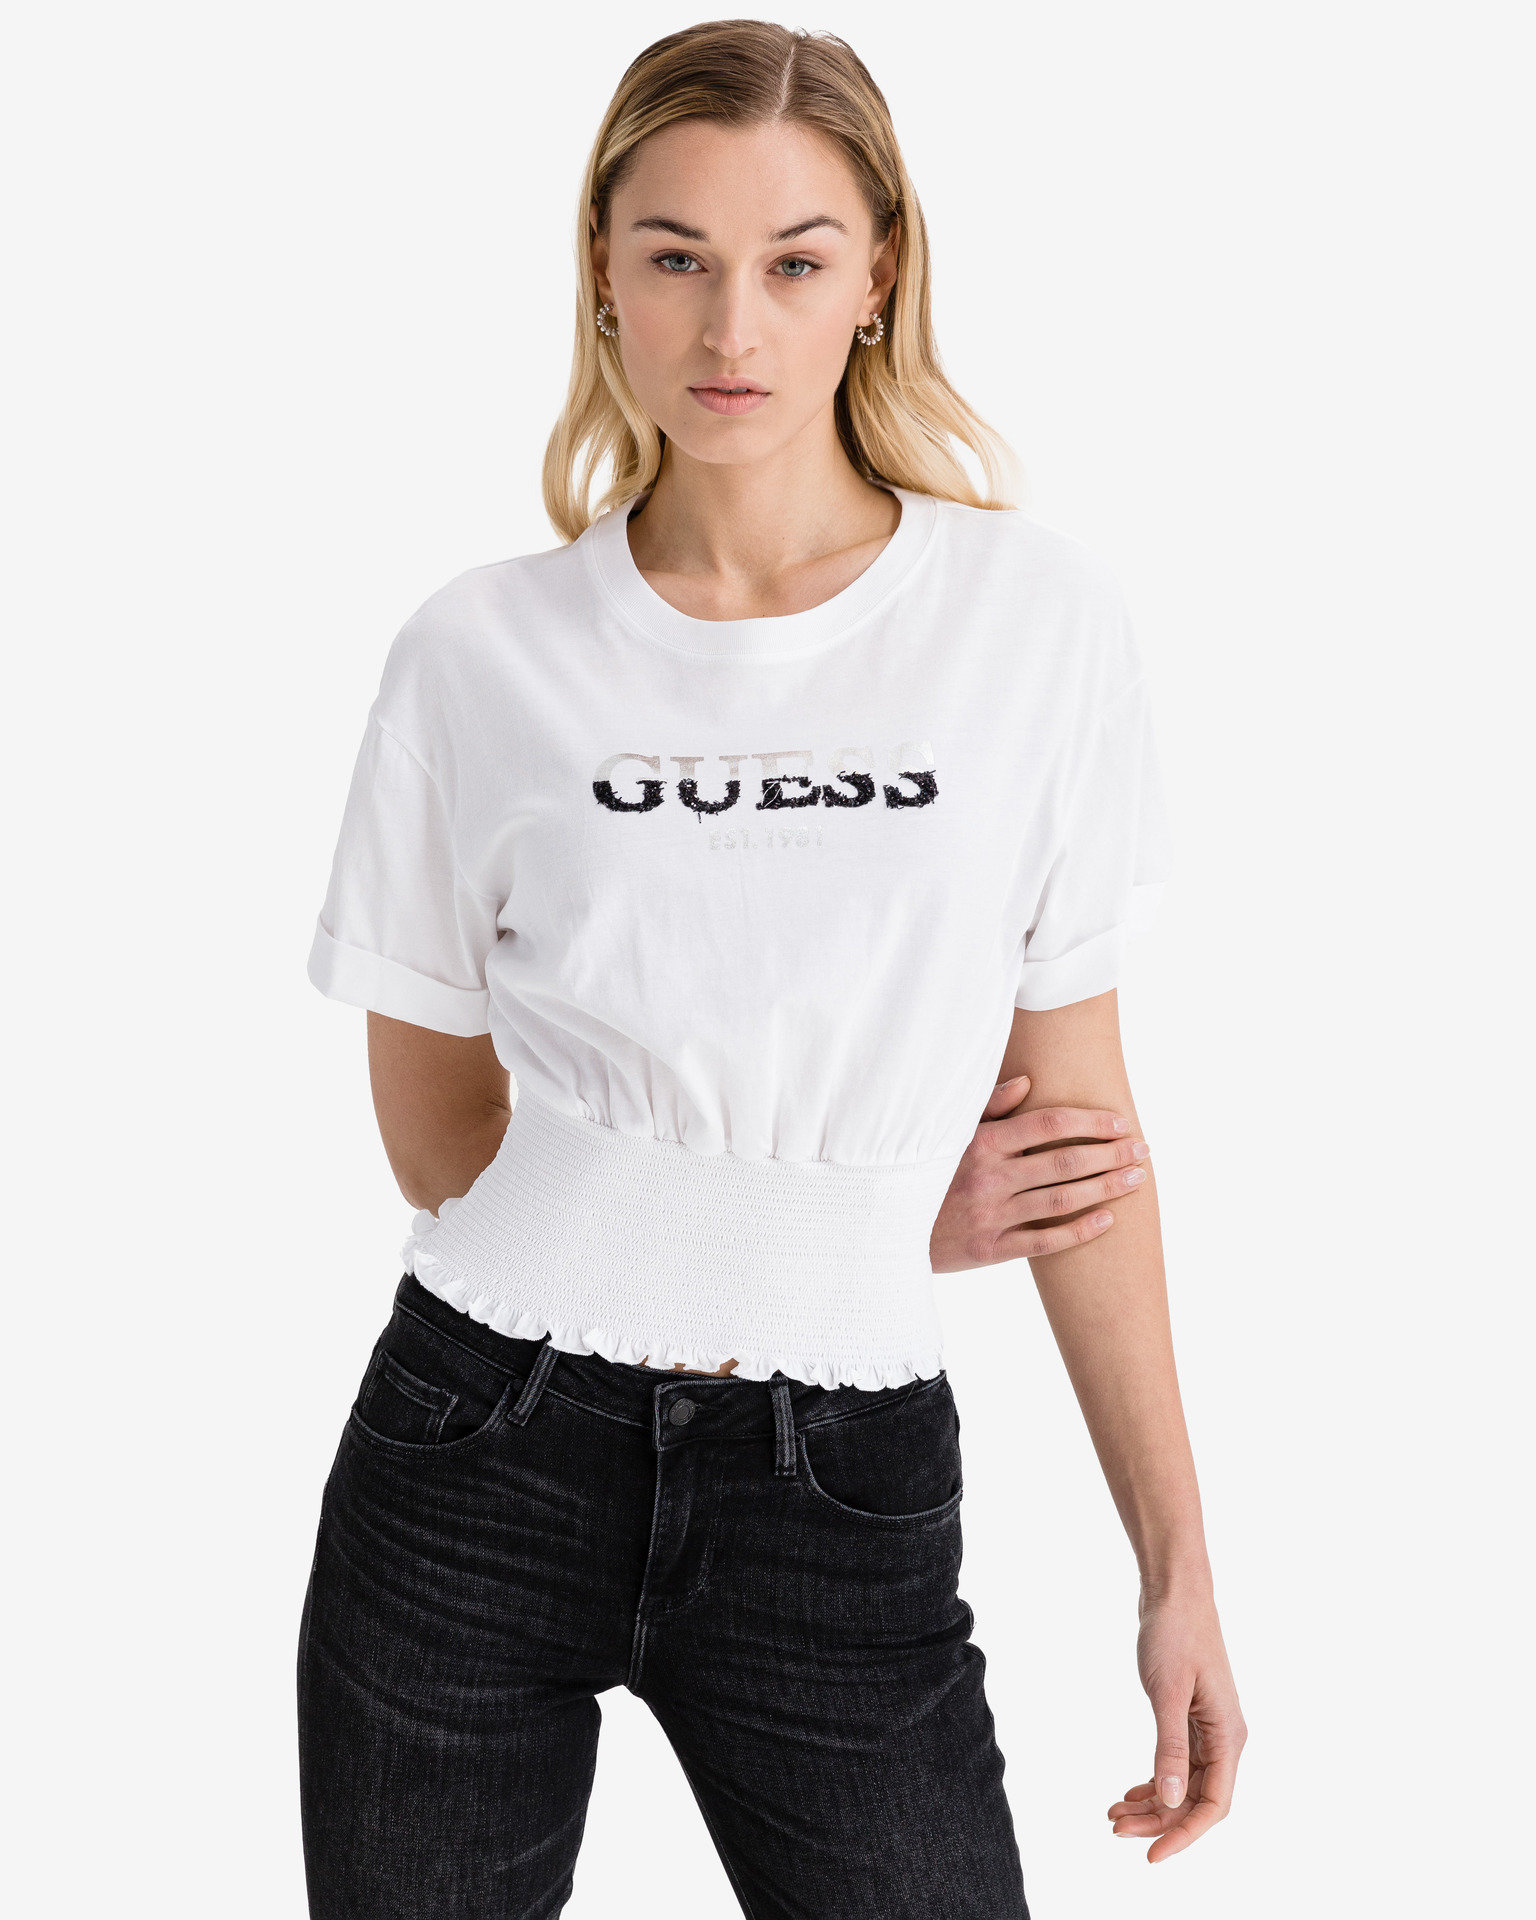 Winifred Crop top Guess